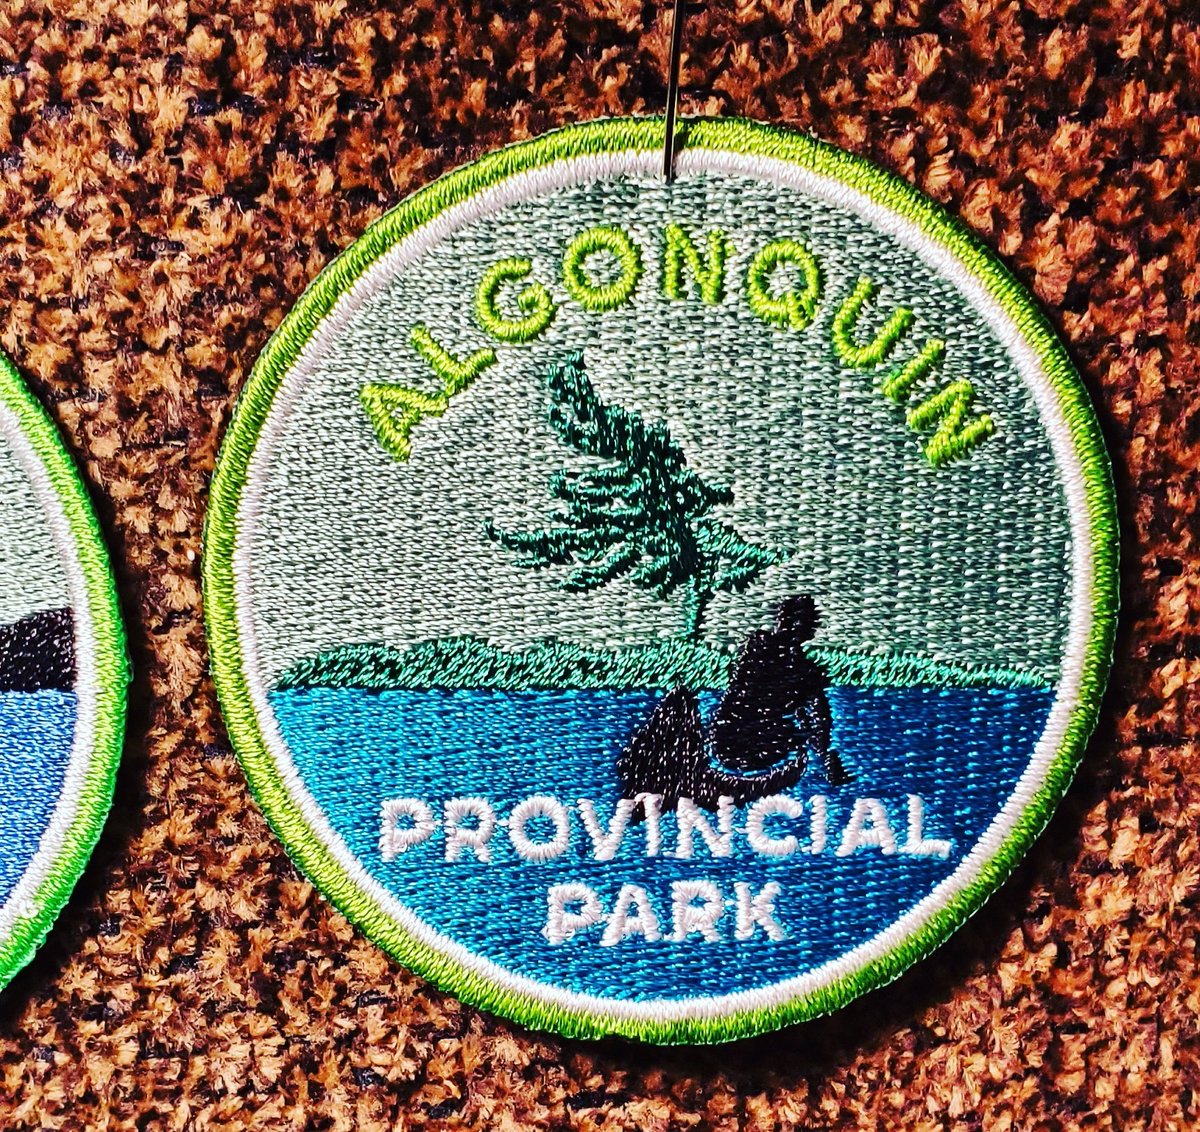 We picked up our next patch @Algonquin_PP @ontarioparks

 #enjoynature #relaxinnature #soulreset #lovecamping #happycampers #hiking #ontario #weeklongvacation #supportourparks